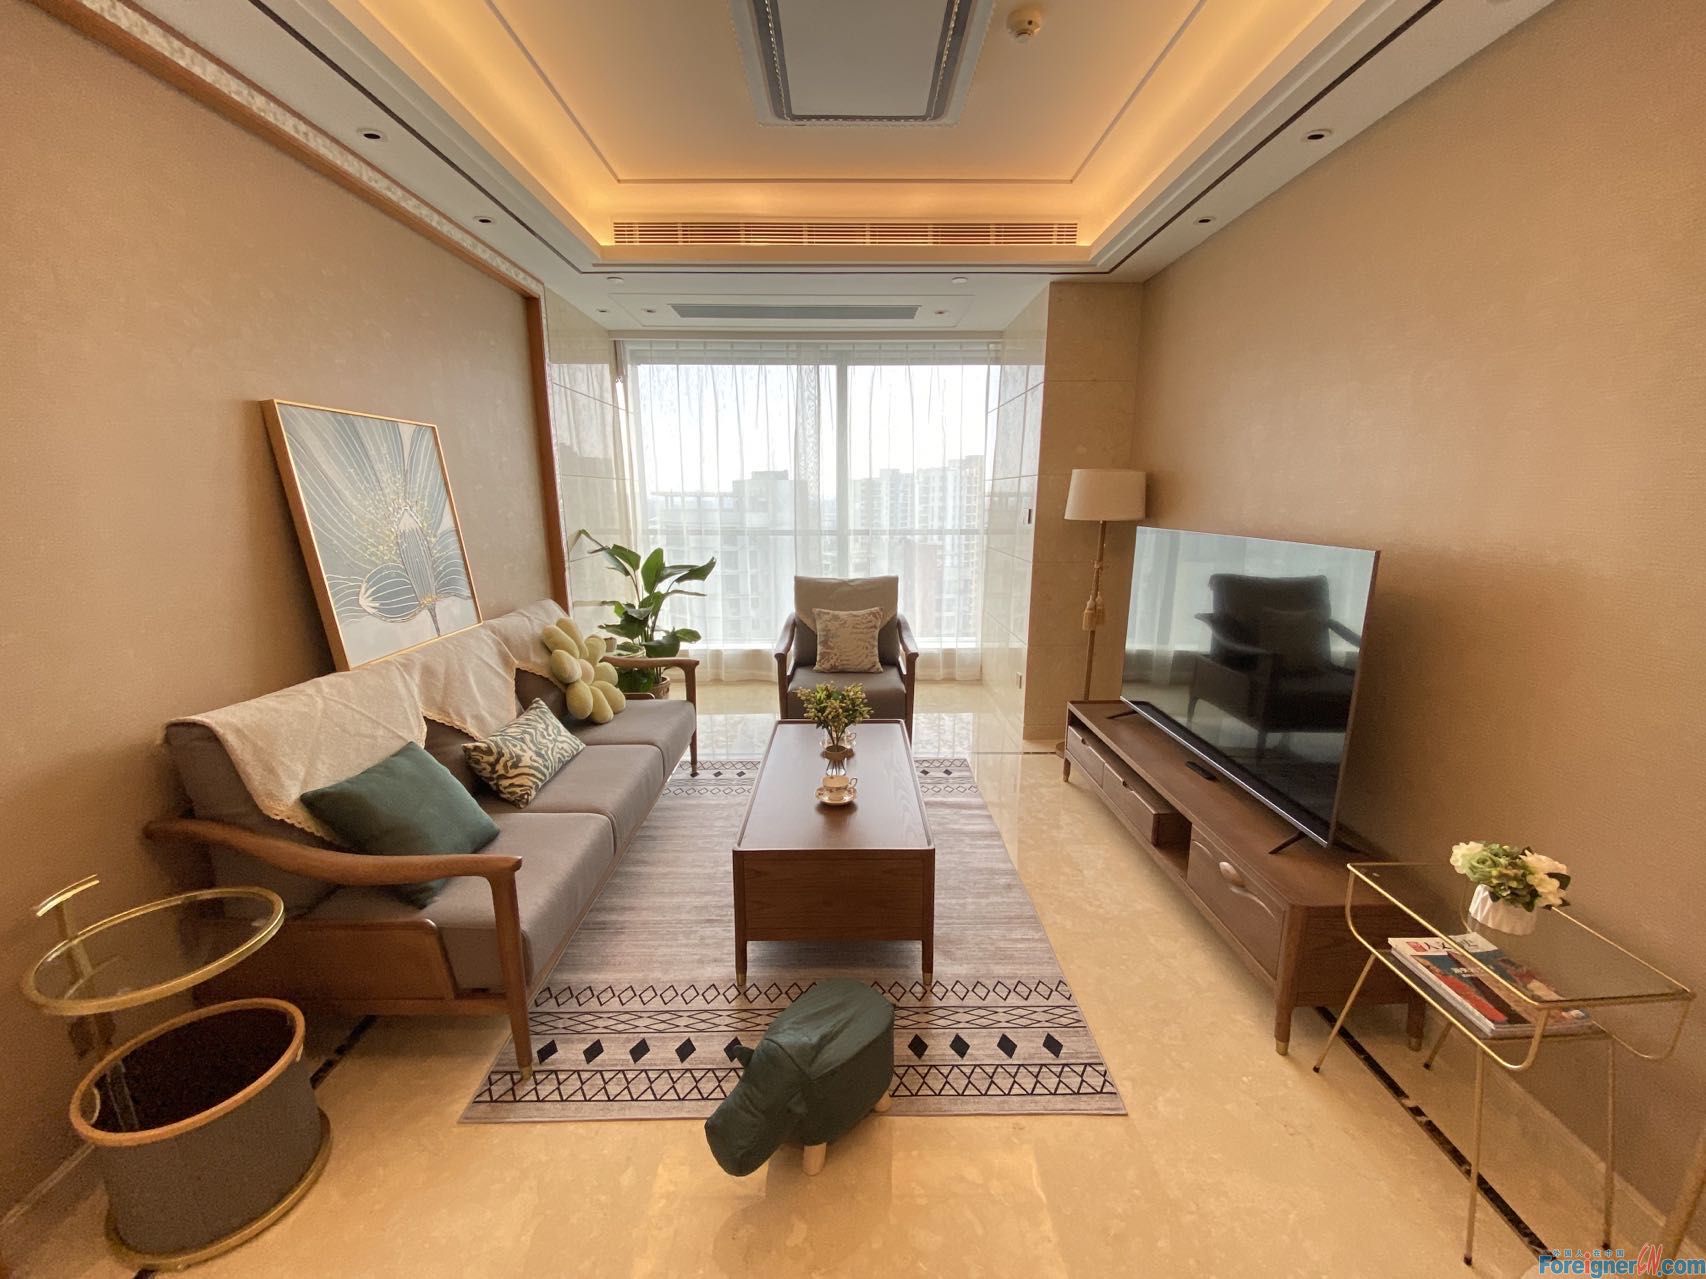 Perfect!! Fabulous Suzhou Center apartment in SIP rent/2 bedrooms,2 bathrooms/Jinji Lake,SIP /Beautiful lake view /fully furnished,Central AC/bright rooms with French windows